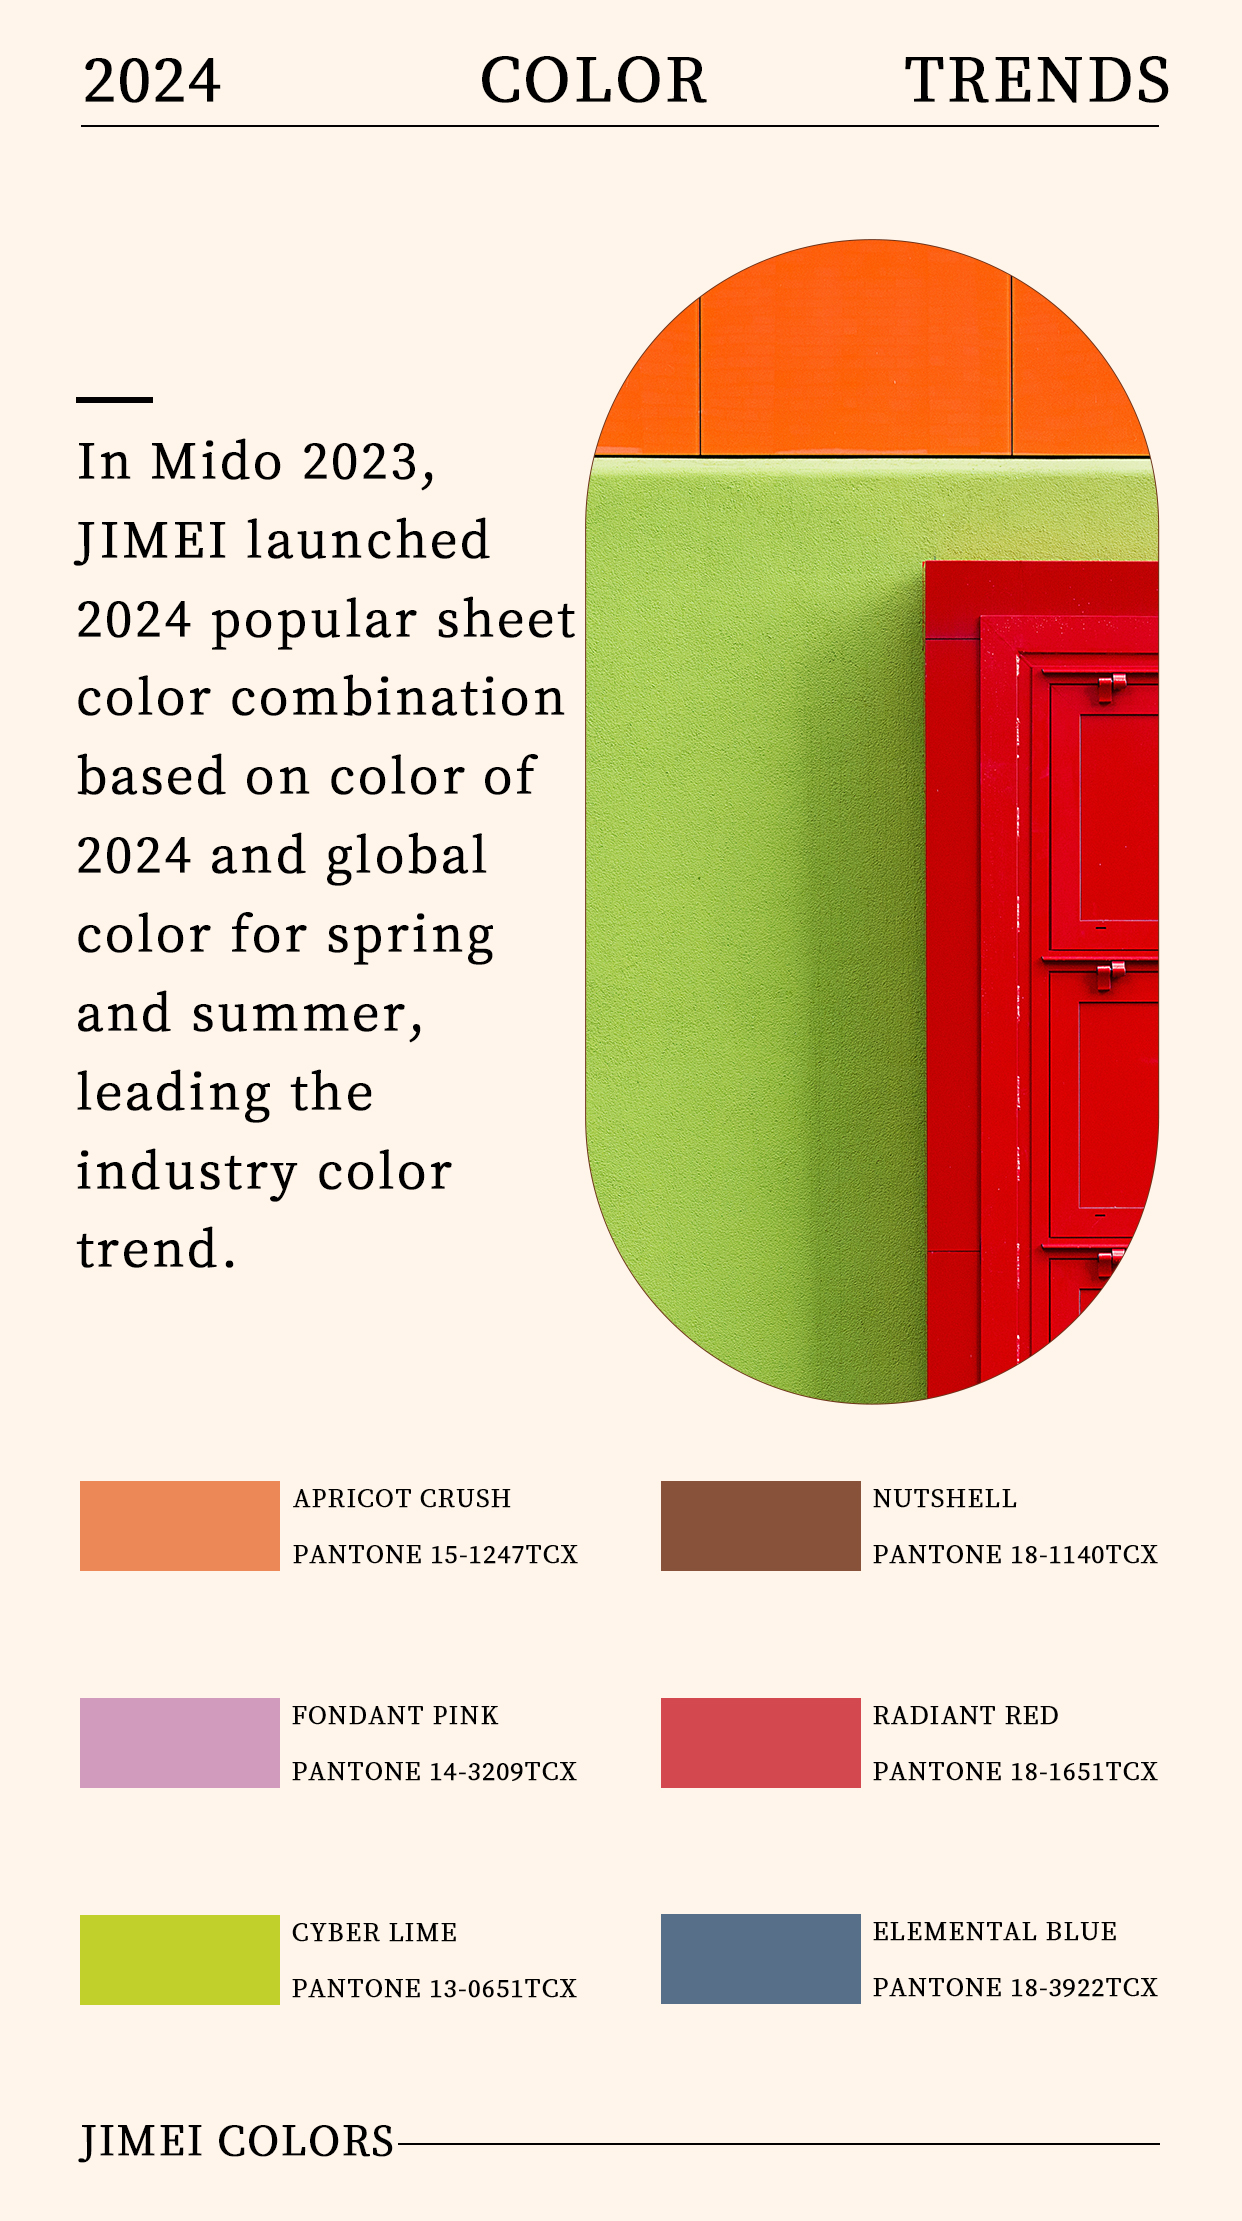 Wgsn Color Trends 2024 - Page Tricia